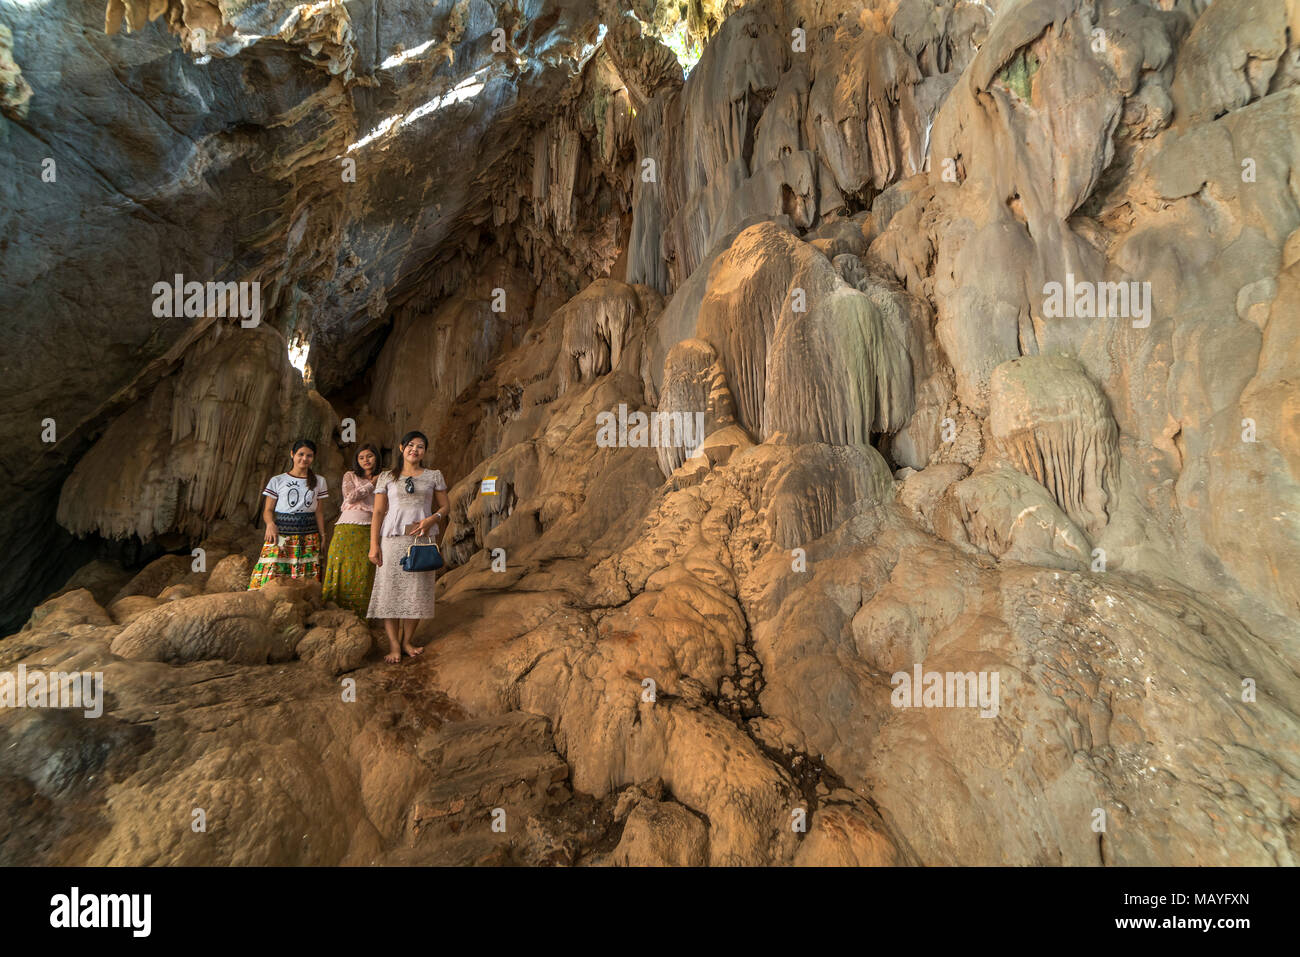 Einheimische Besucher in der Kawgon-Höhle, Hpa-an, Myanmar, Asien  |  local visitors, Kaw Goon Cave, Hpa-an, Myanmar, Asia Stock Photo